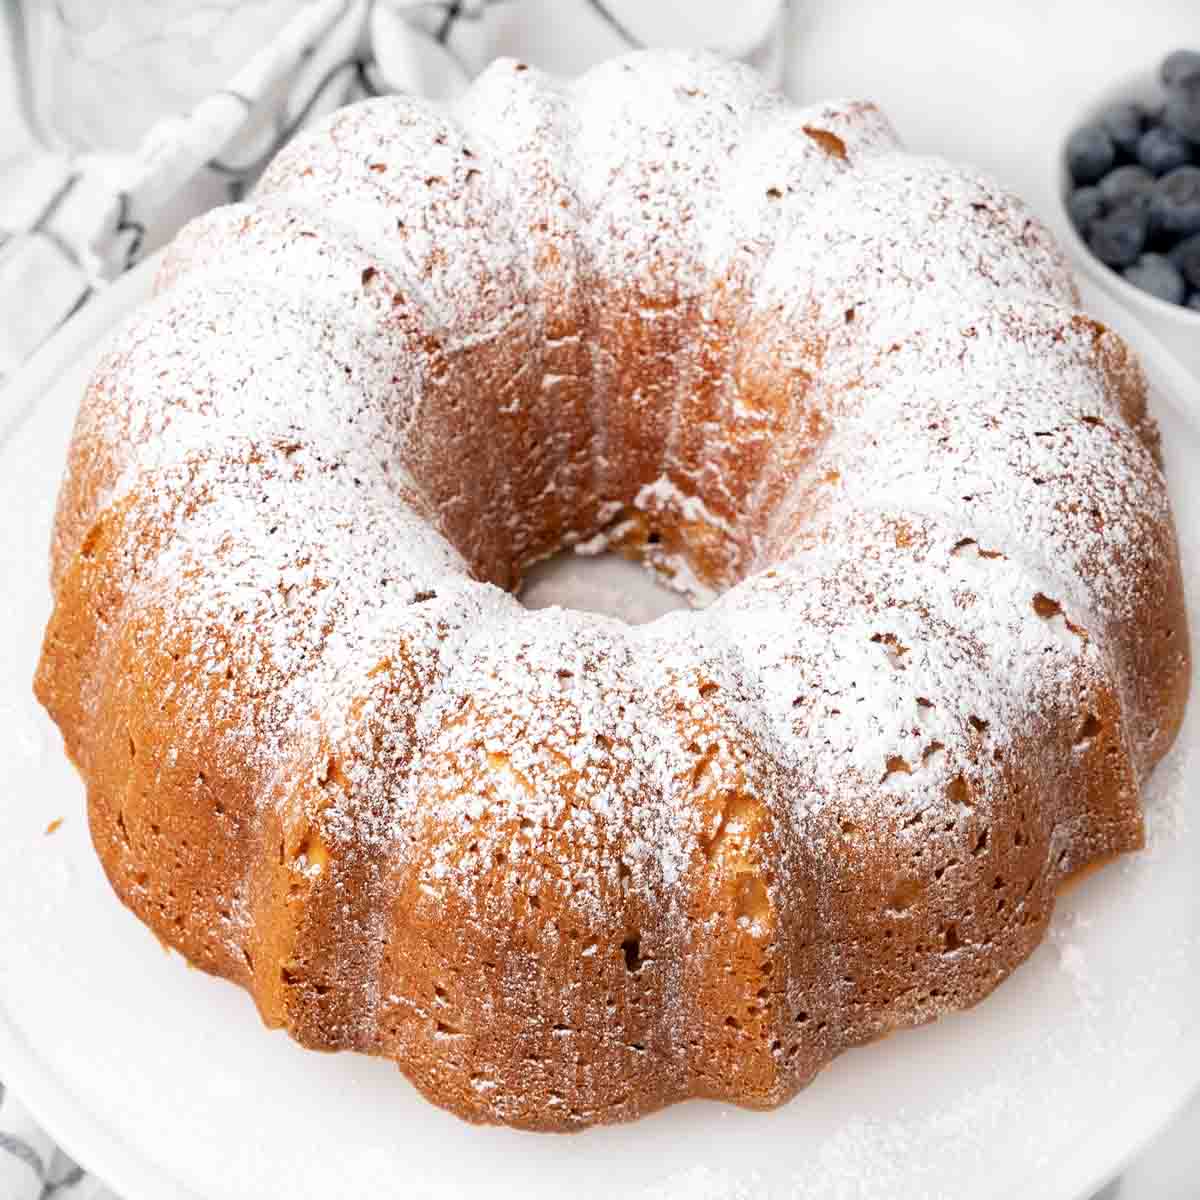 Whole cream cheese pound cake dusted with powdered sugar on white platter.